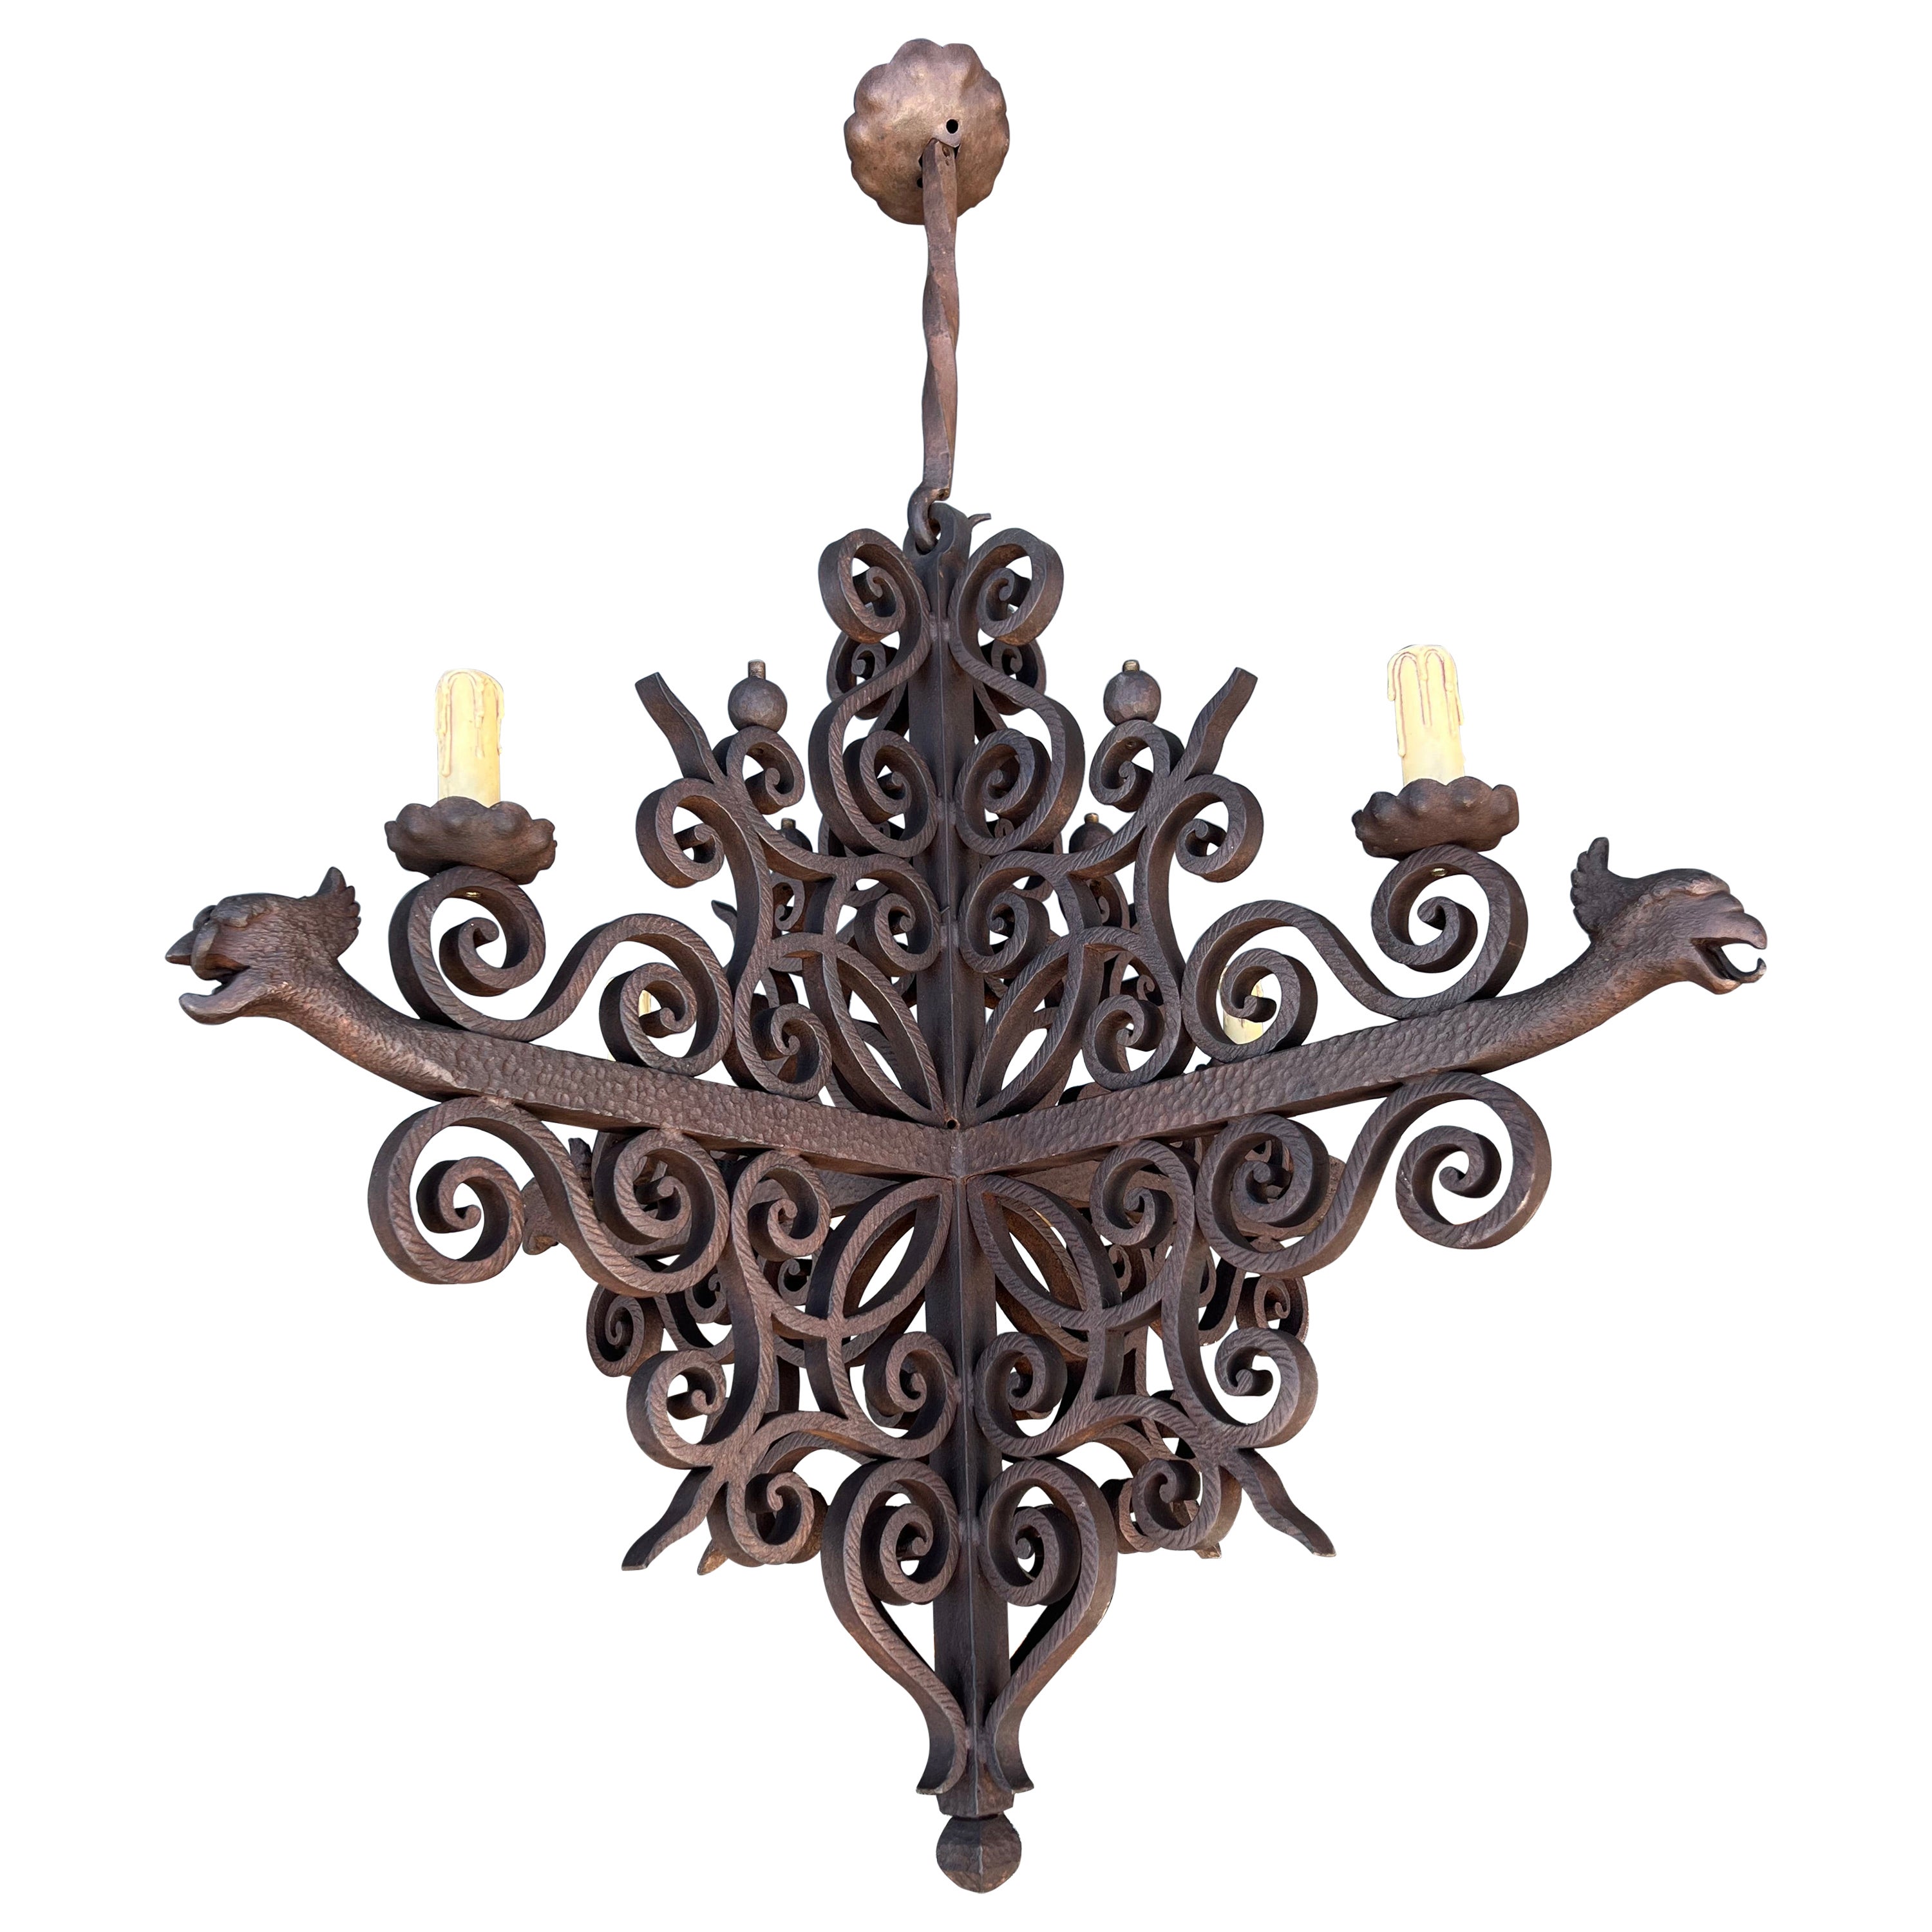 Impressive Large Forged Wrought Iron Four-Light Chandelier w. Phoenix Sculptures For Sale